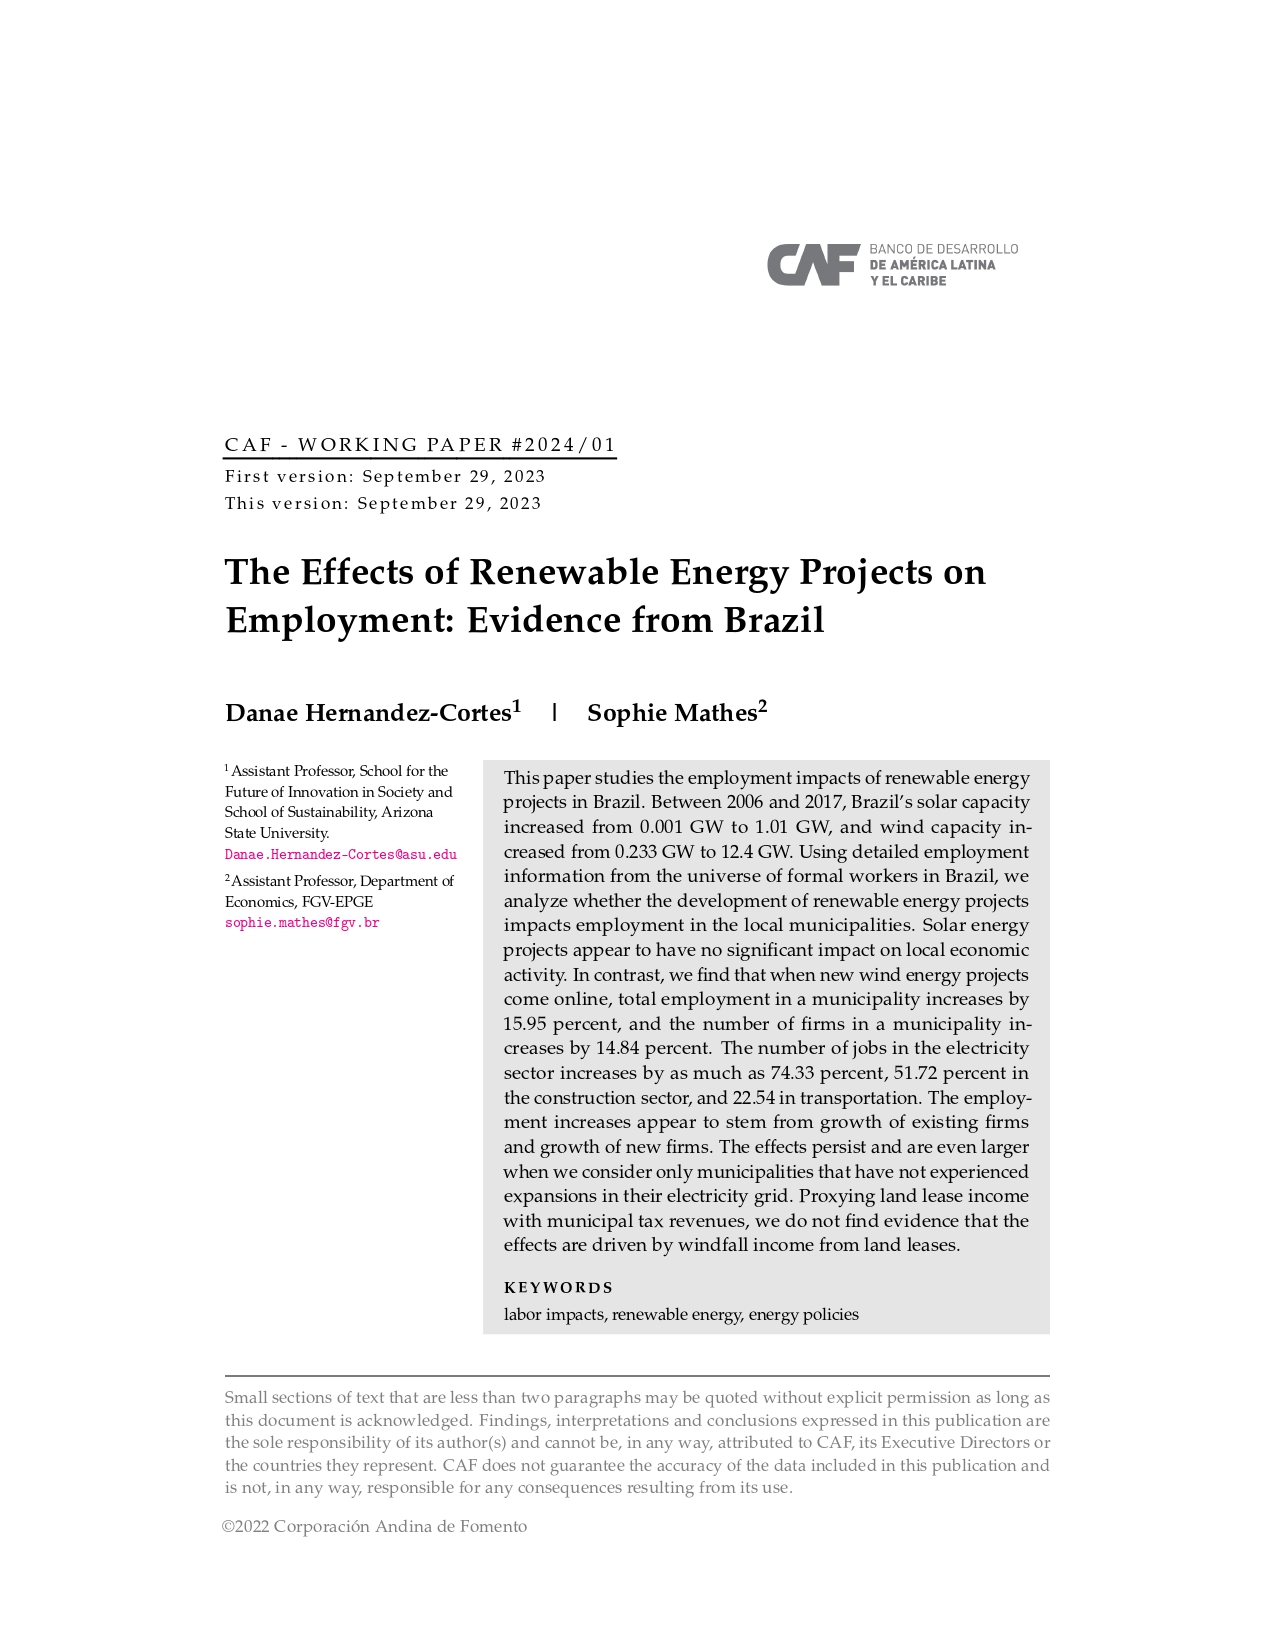 The Effects of Renewable Energy Projects on Employment: Evidence from Brazil